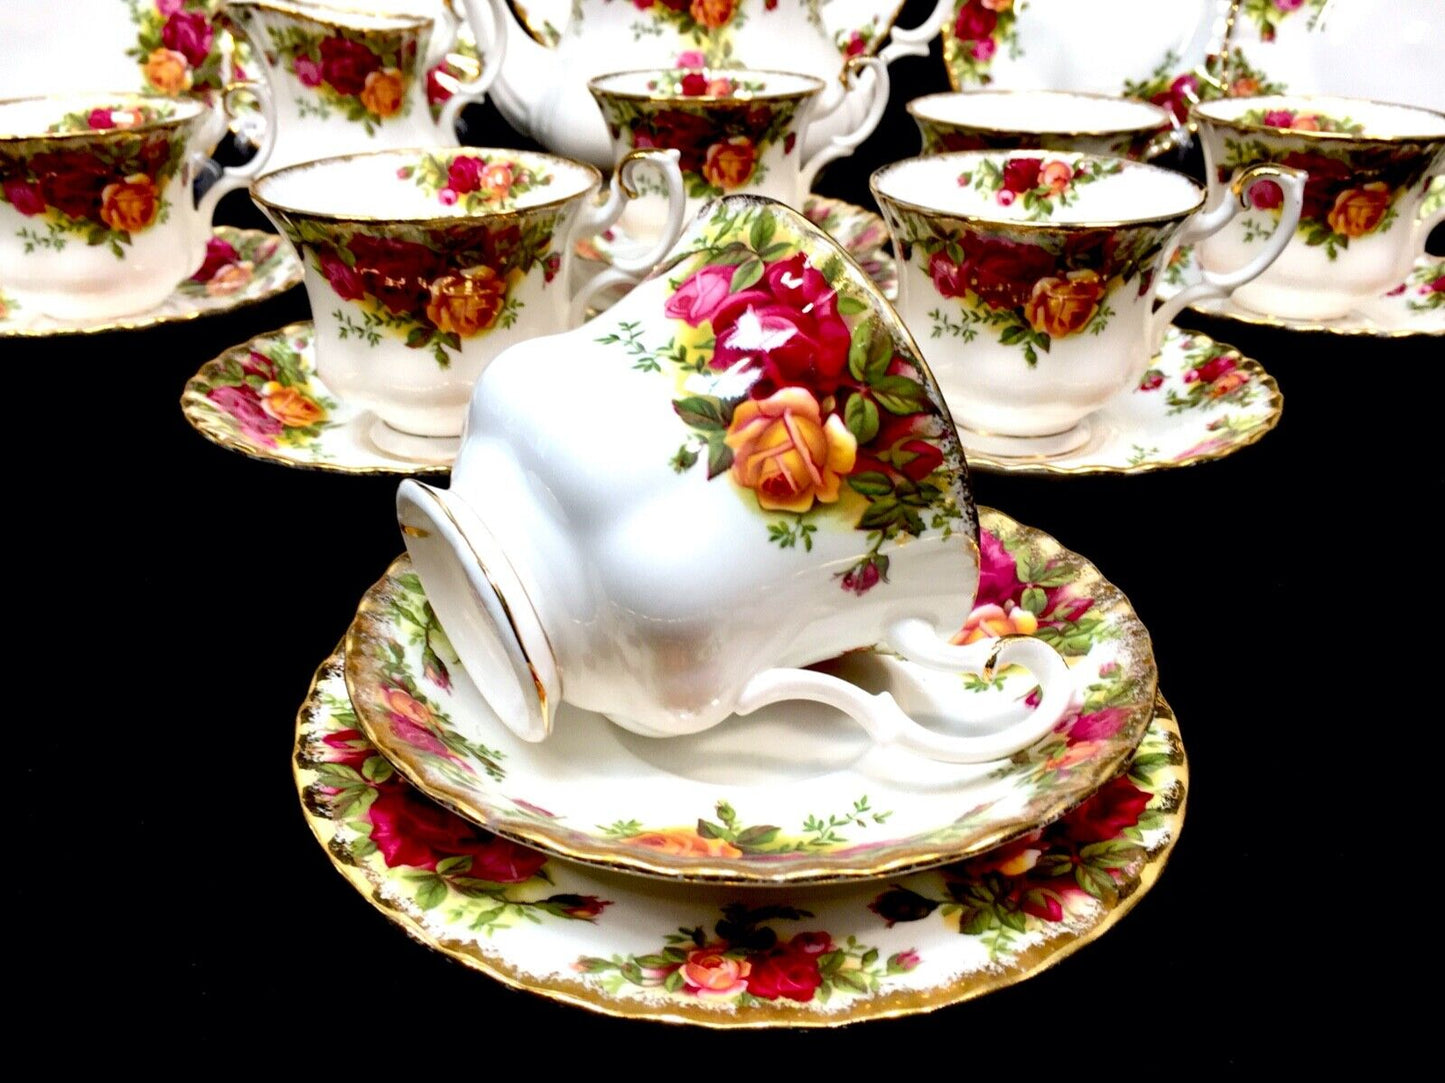 Royal Albert Old Country Roses Tea Service Set for 6 People / Vintage 1960s